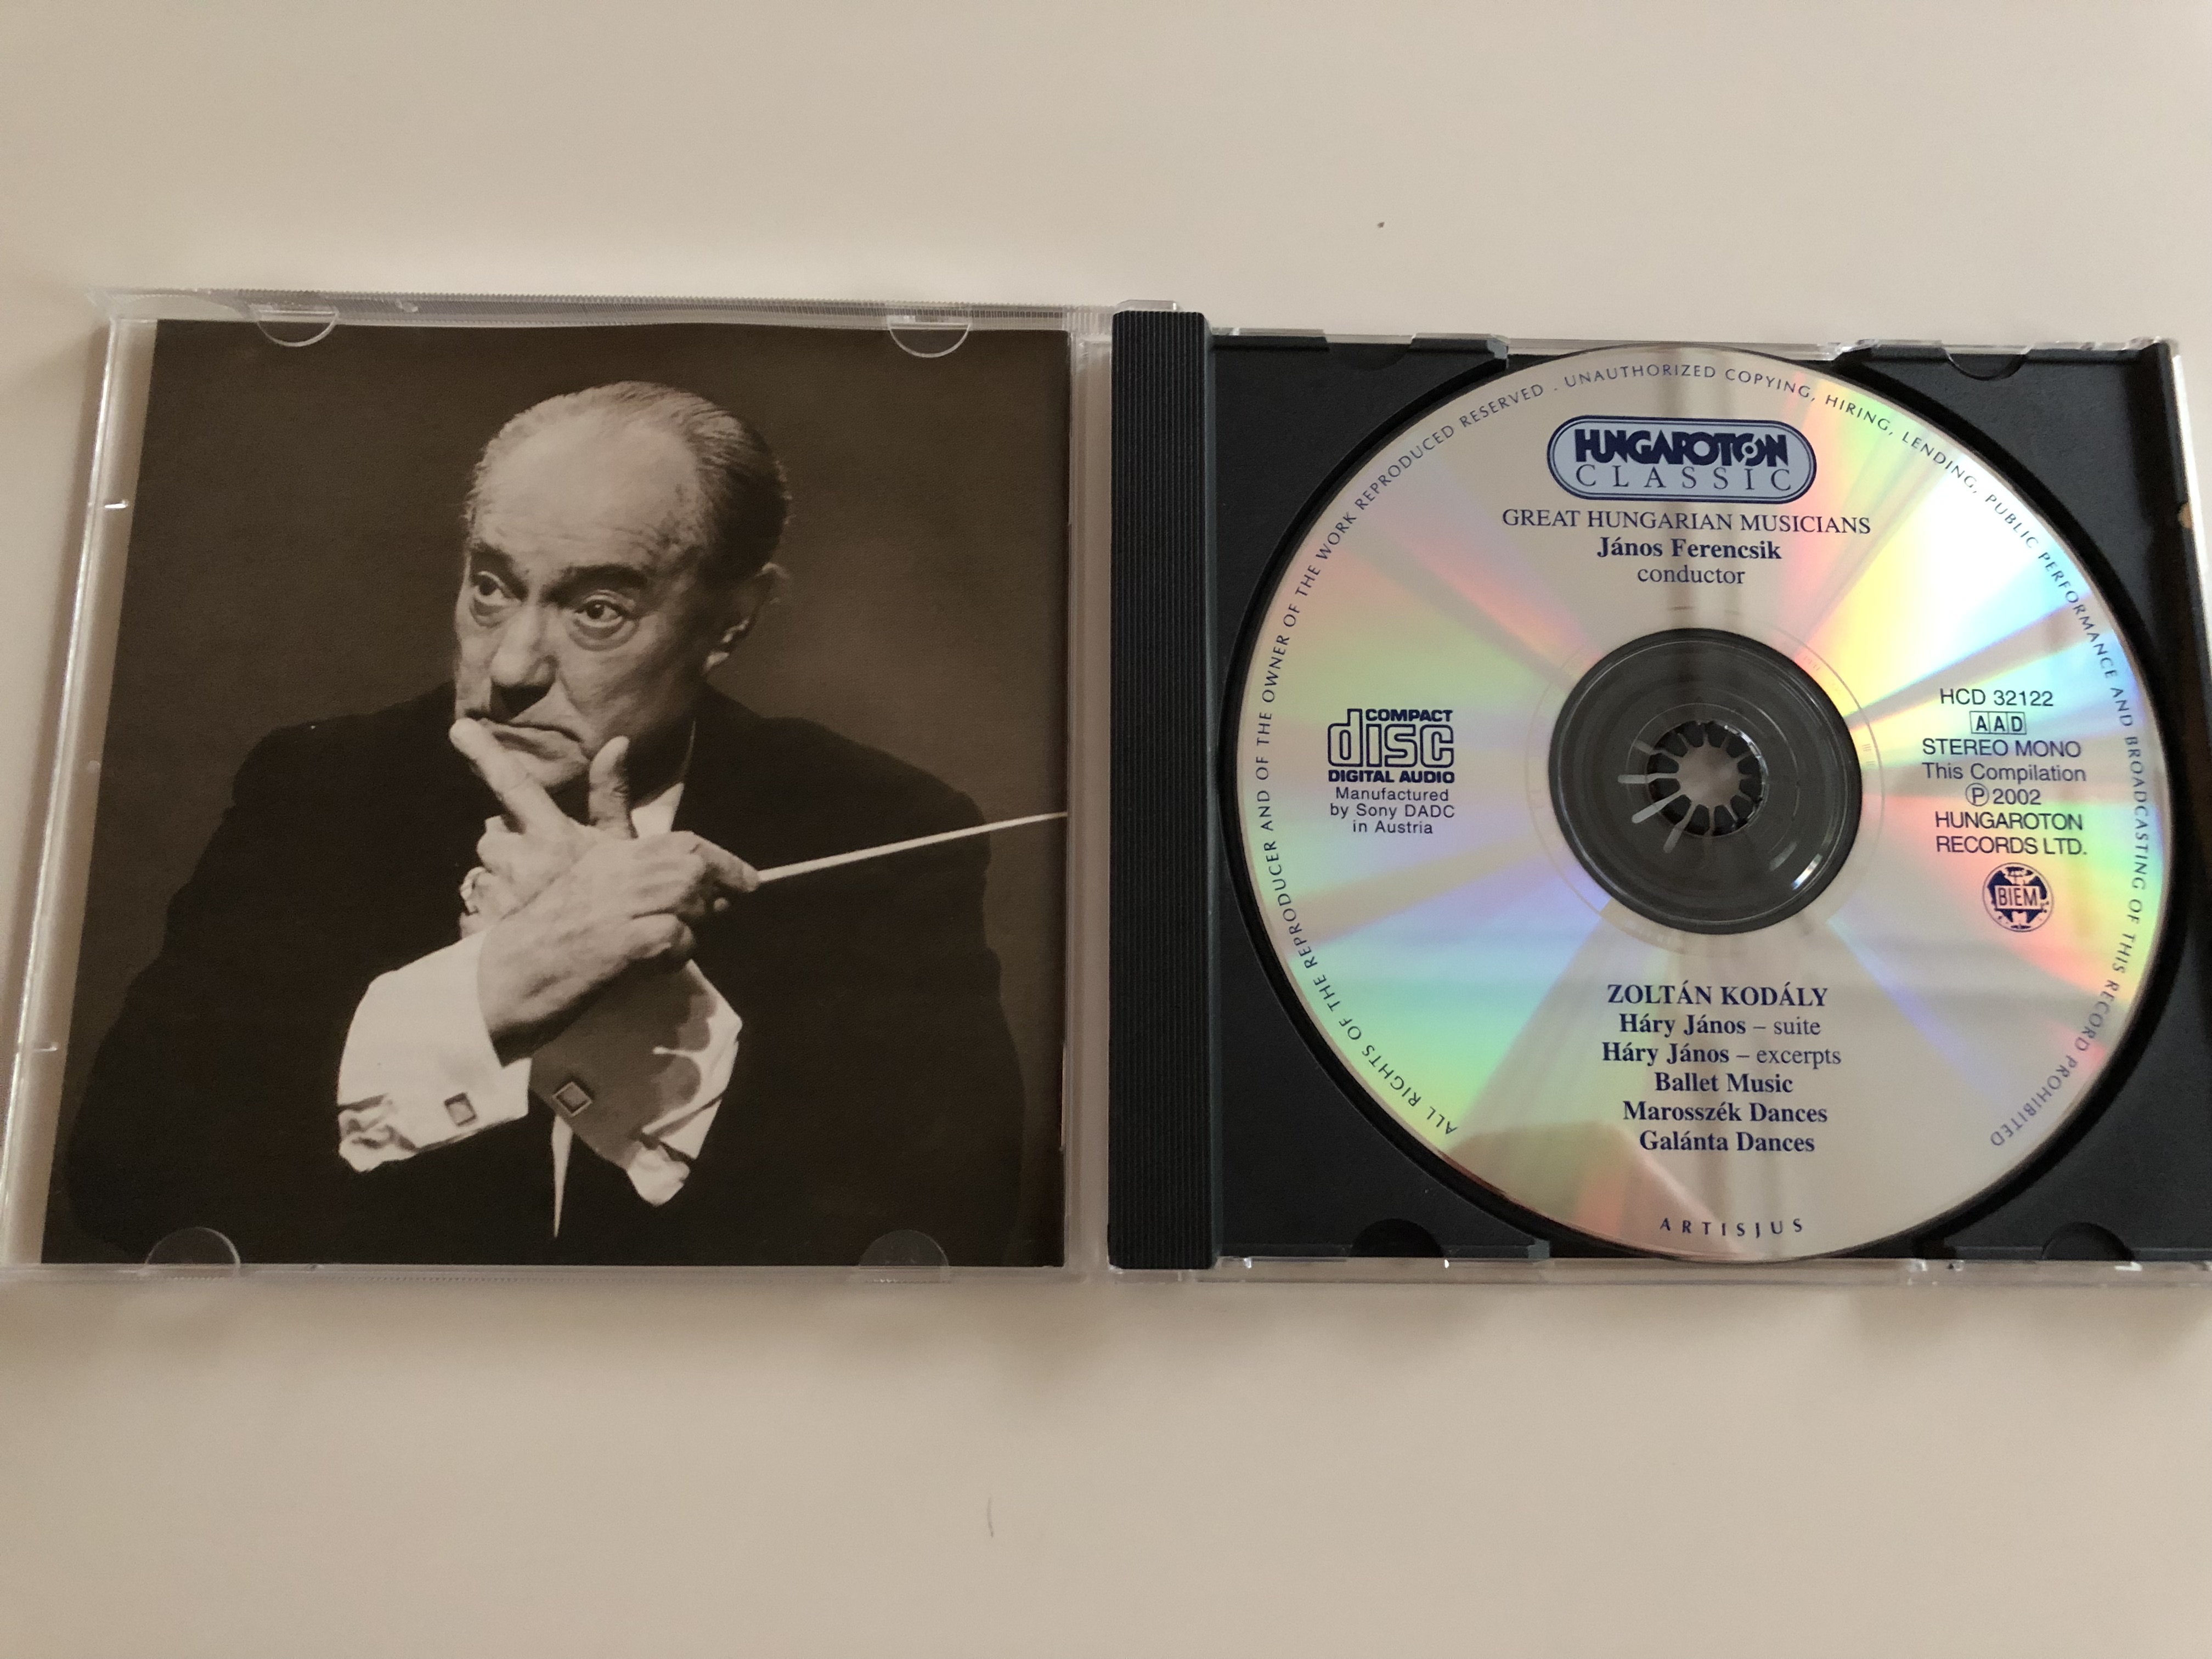 j-nos-ferencsik-conductor-great-hungarian-musicians-kod-ly-budapest-philharmonic-orchestra-historical-recordings-hungaroton-classic-audio-cd-2002-hcd-32122-6-.jpg